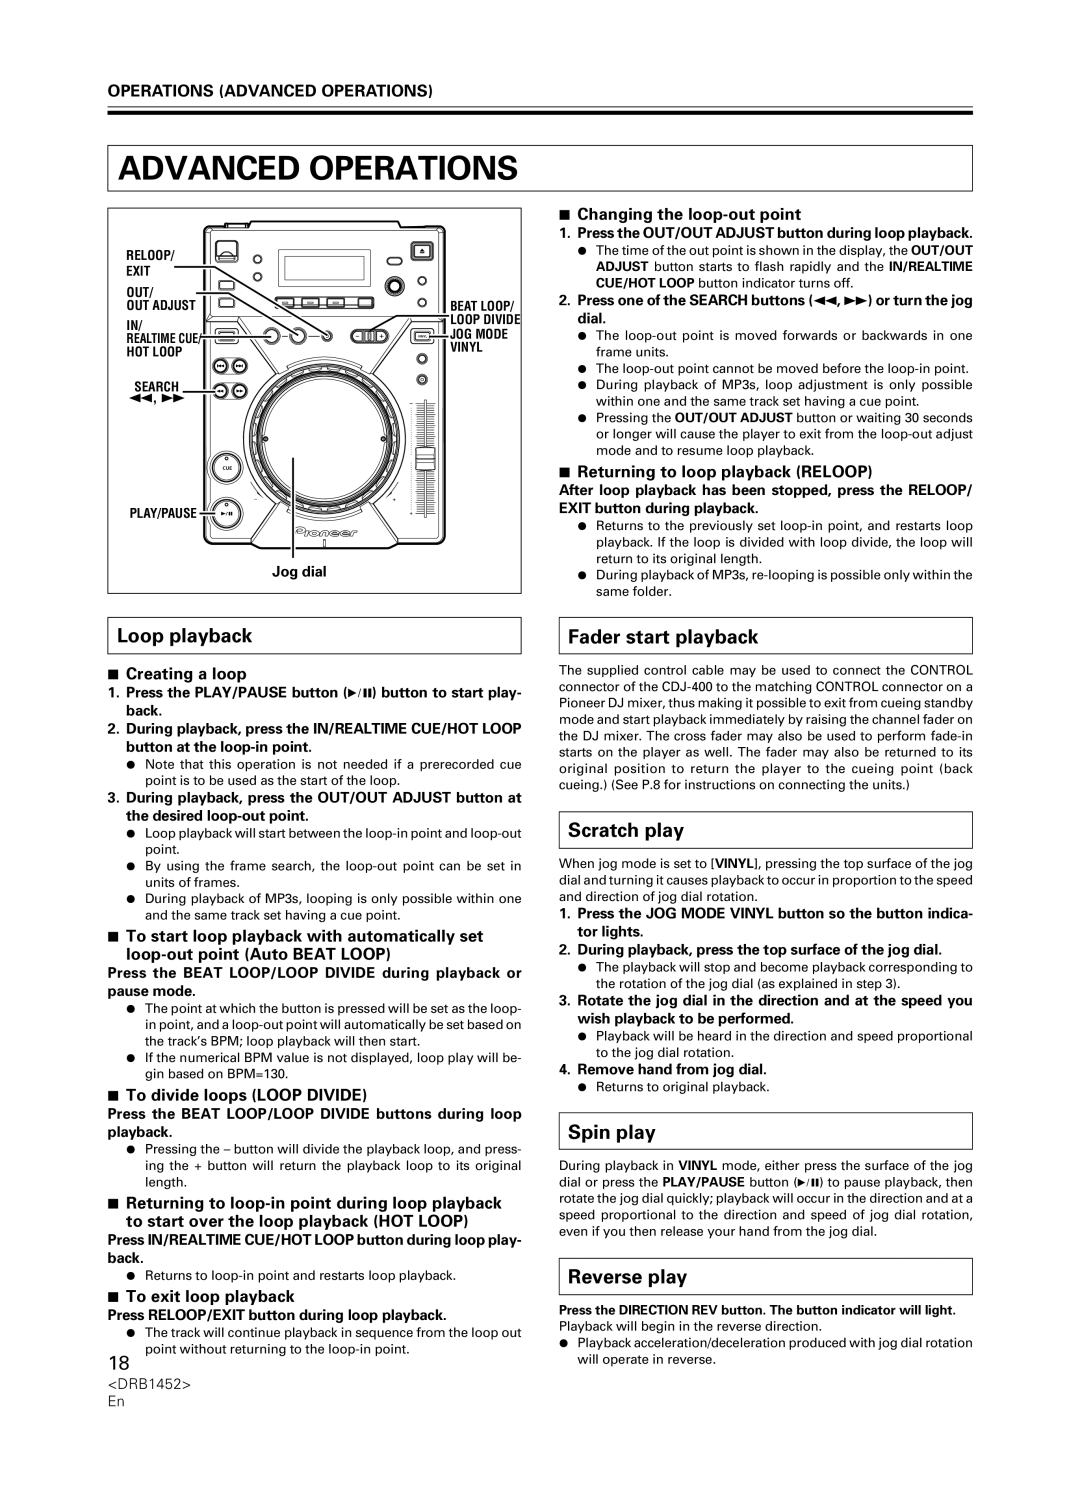 Pioneer CDJ-400 manual Advanced Operations, Loop playback, Fader start playback, Scratch play, Spin play, Reverse play 